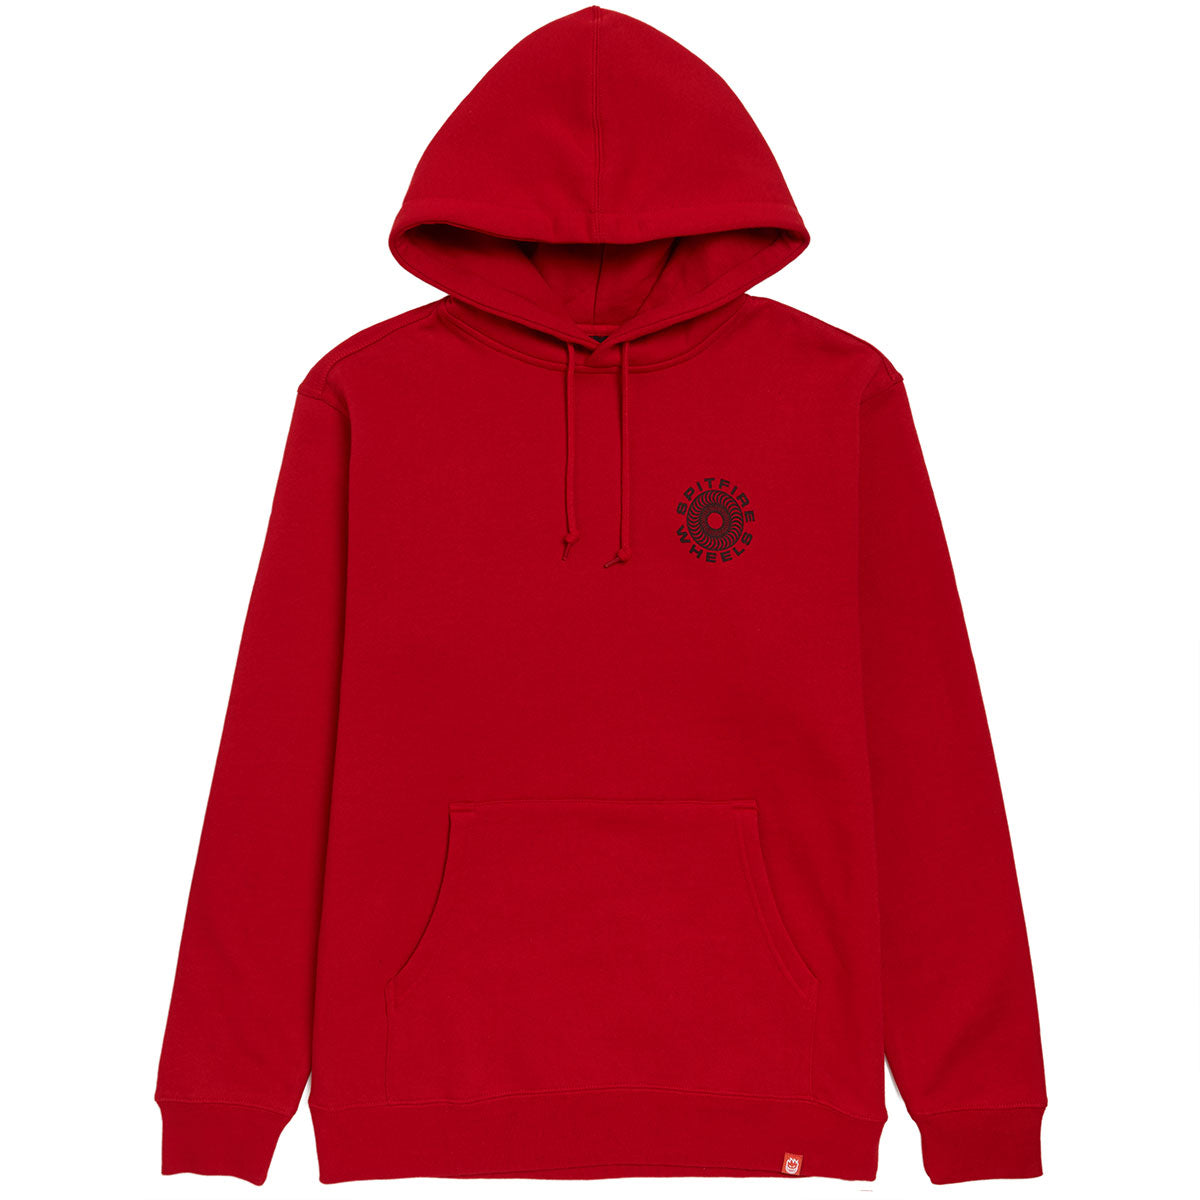 Spitfire Classic '87 Swirl Fill Hoodie - Scarlet/Black/White image 2